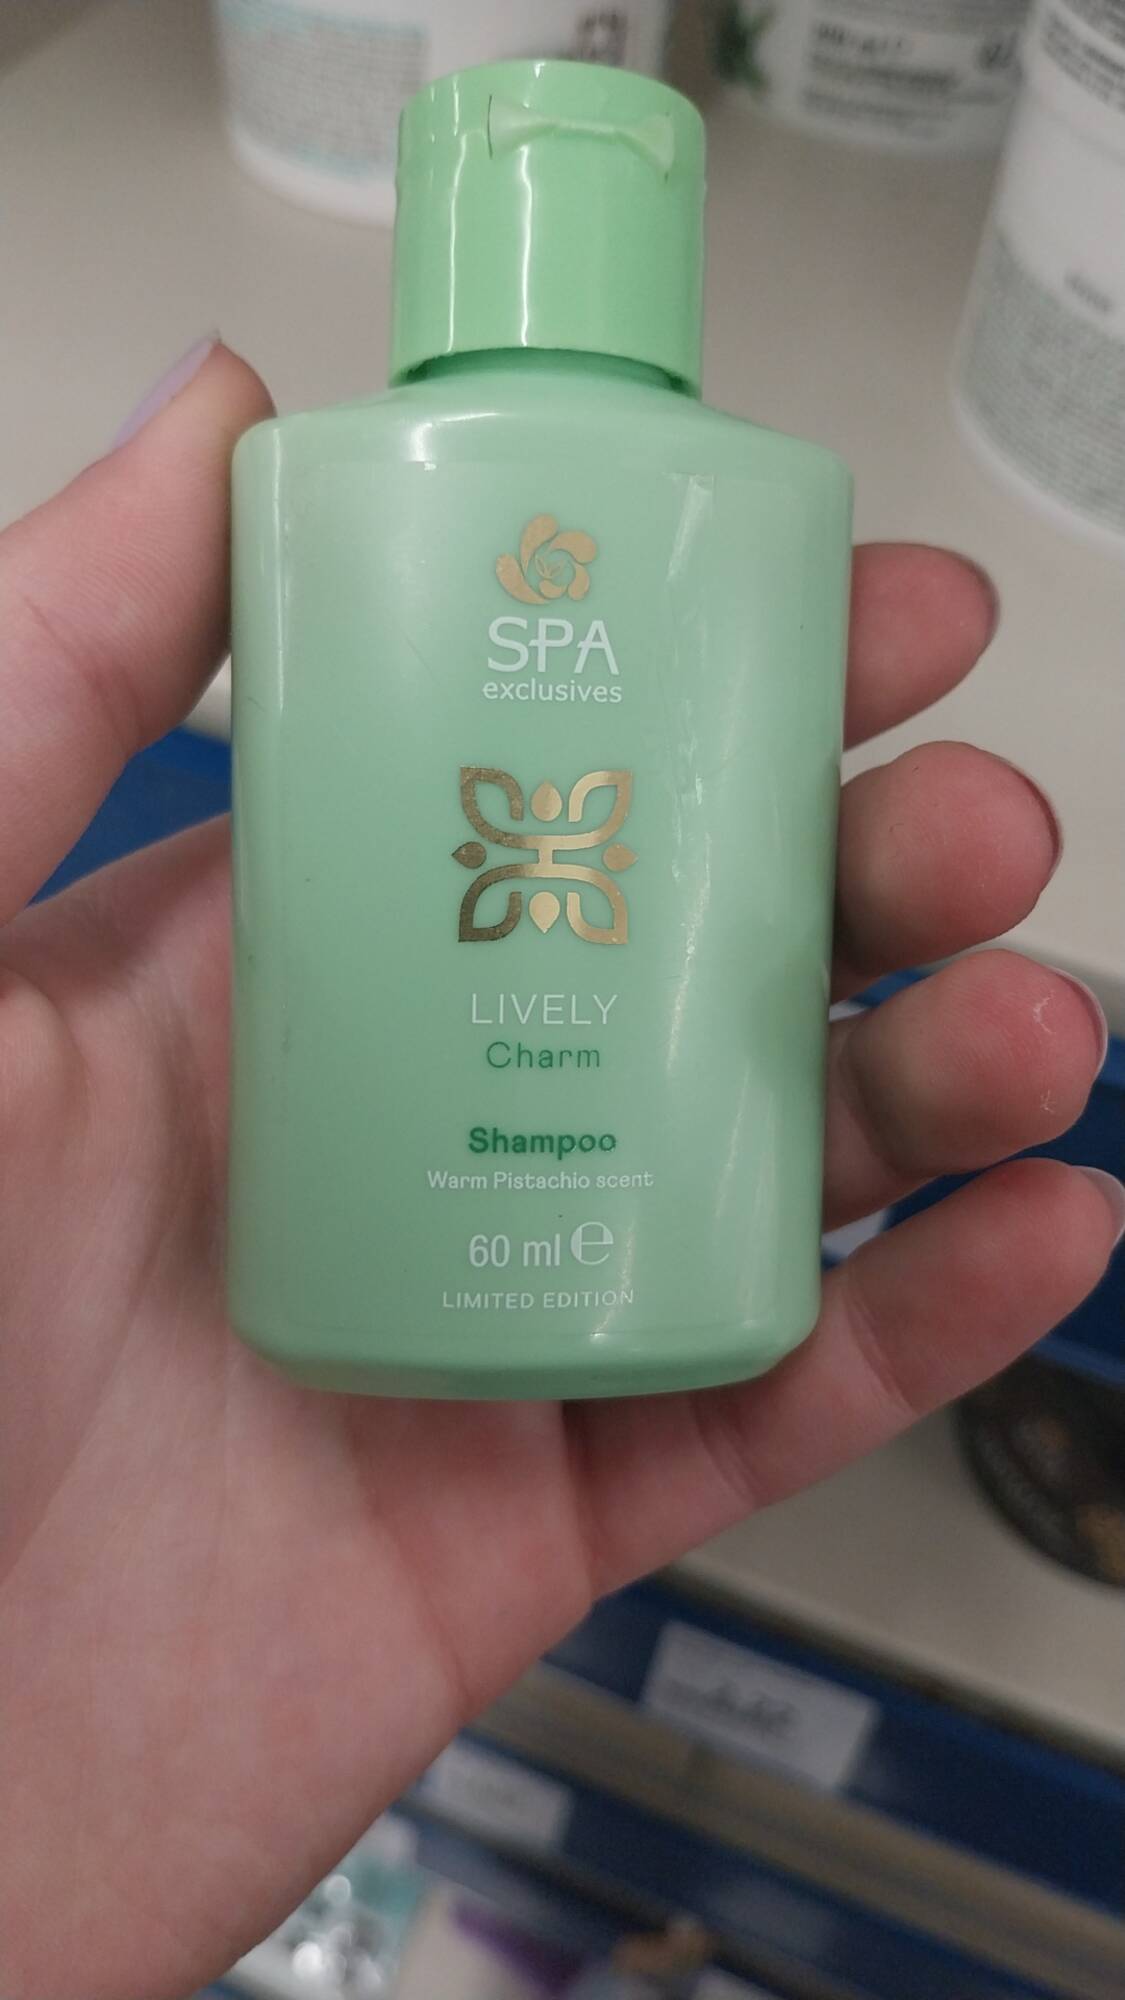 SPA EXCLUSIVES - Lively charm shampoo 